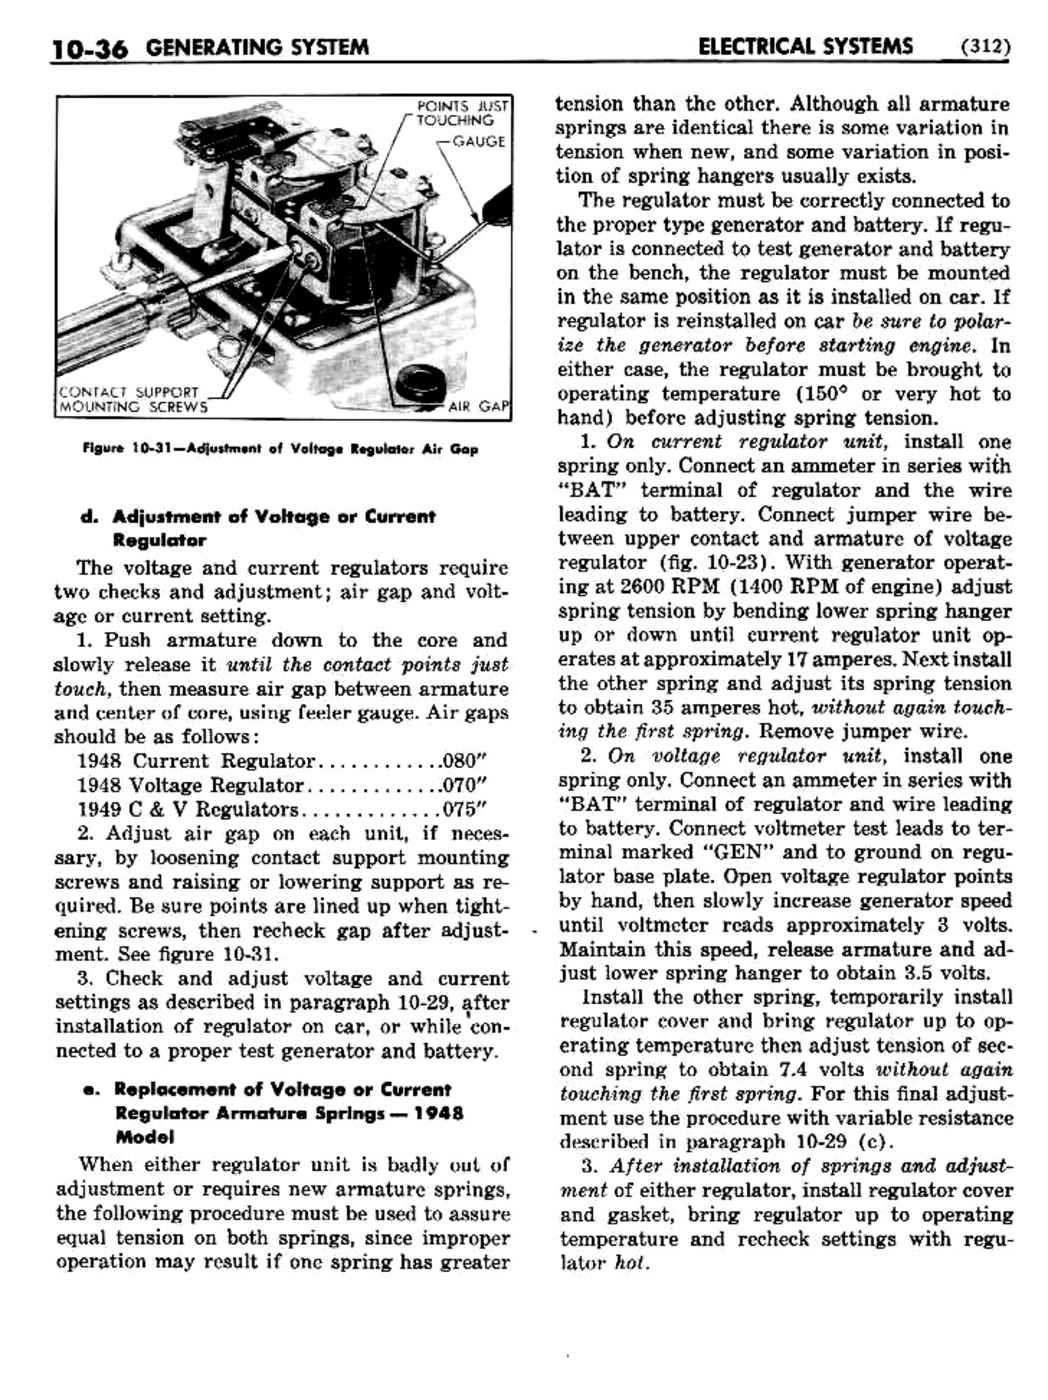 n_11 1948 Buick Shop Manual - Electrical Systems-036-036.jpg